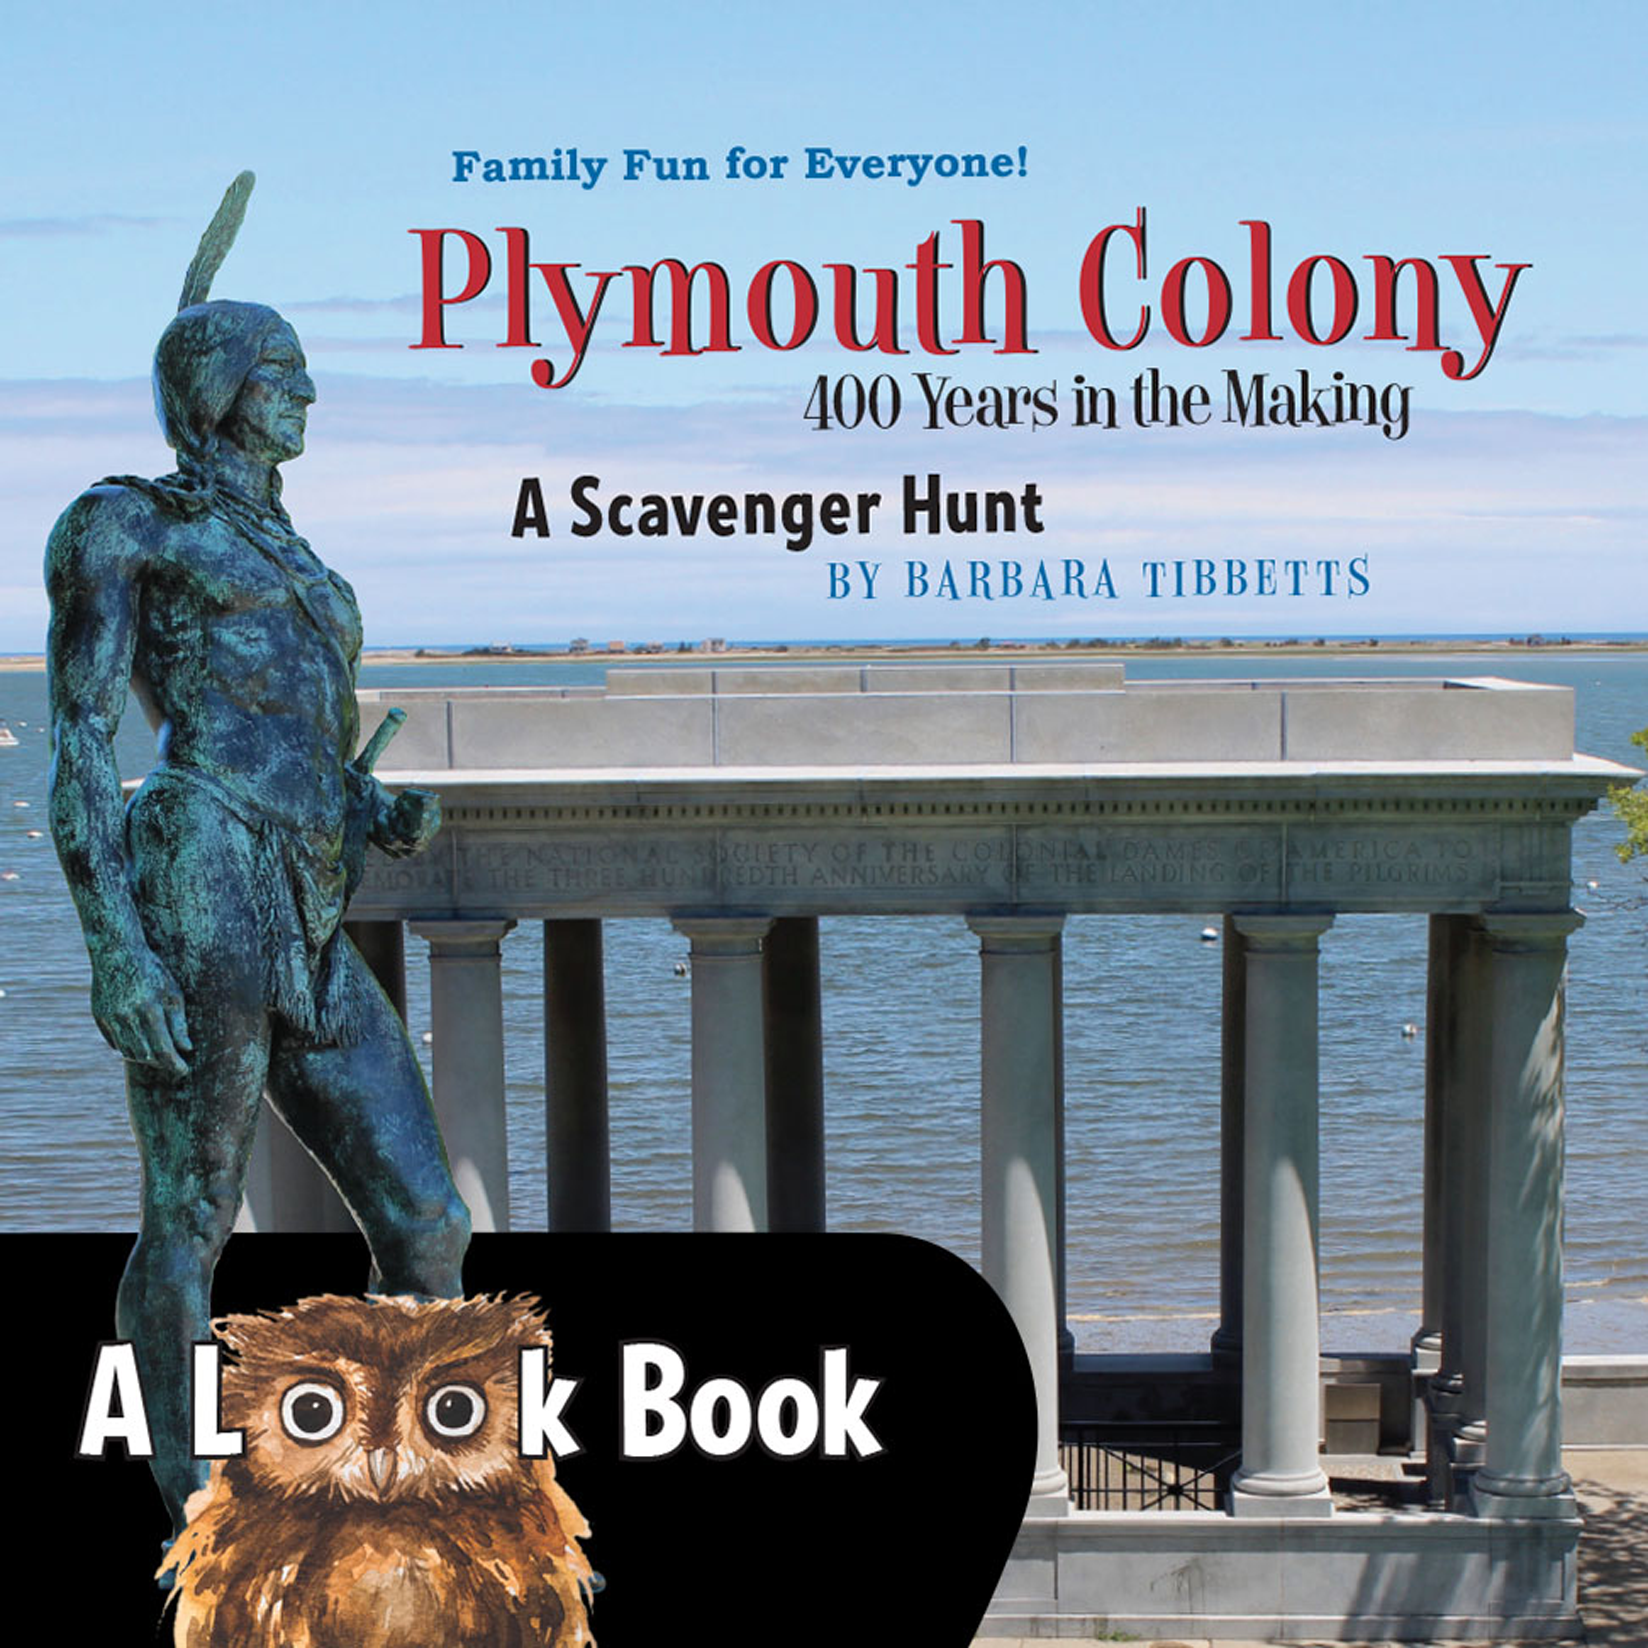 Plymouth Colony – 400 Years in the Making